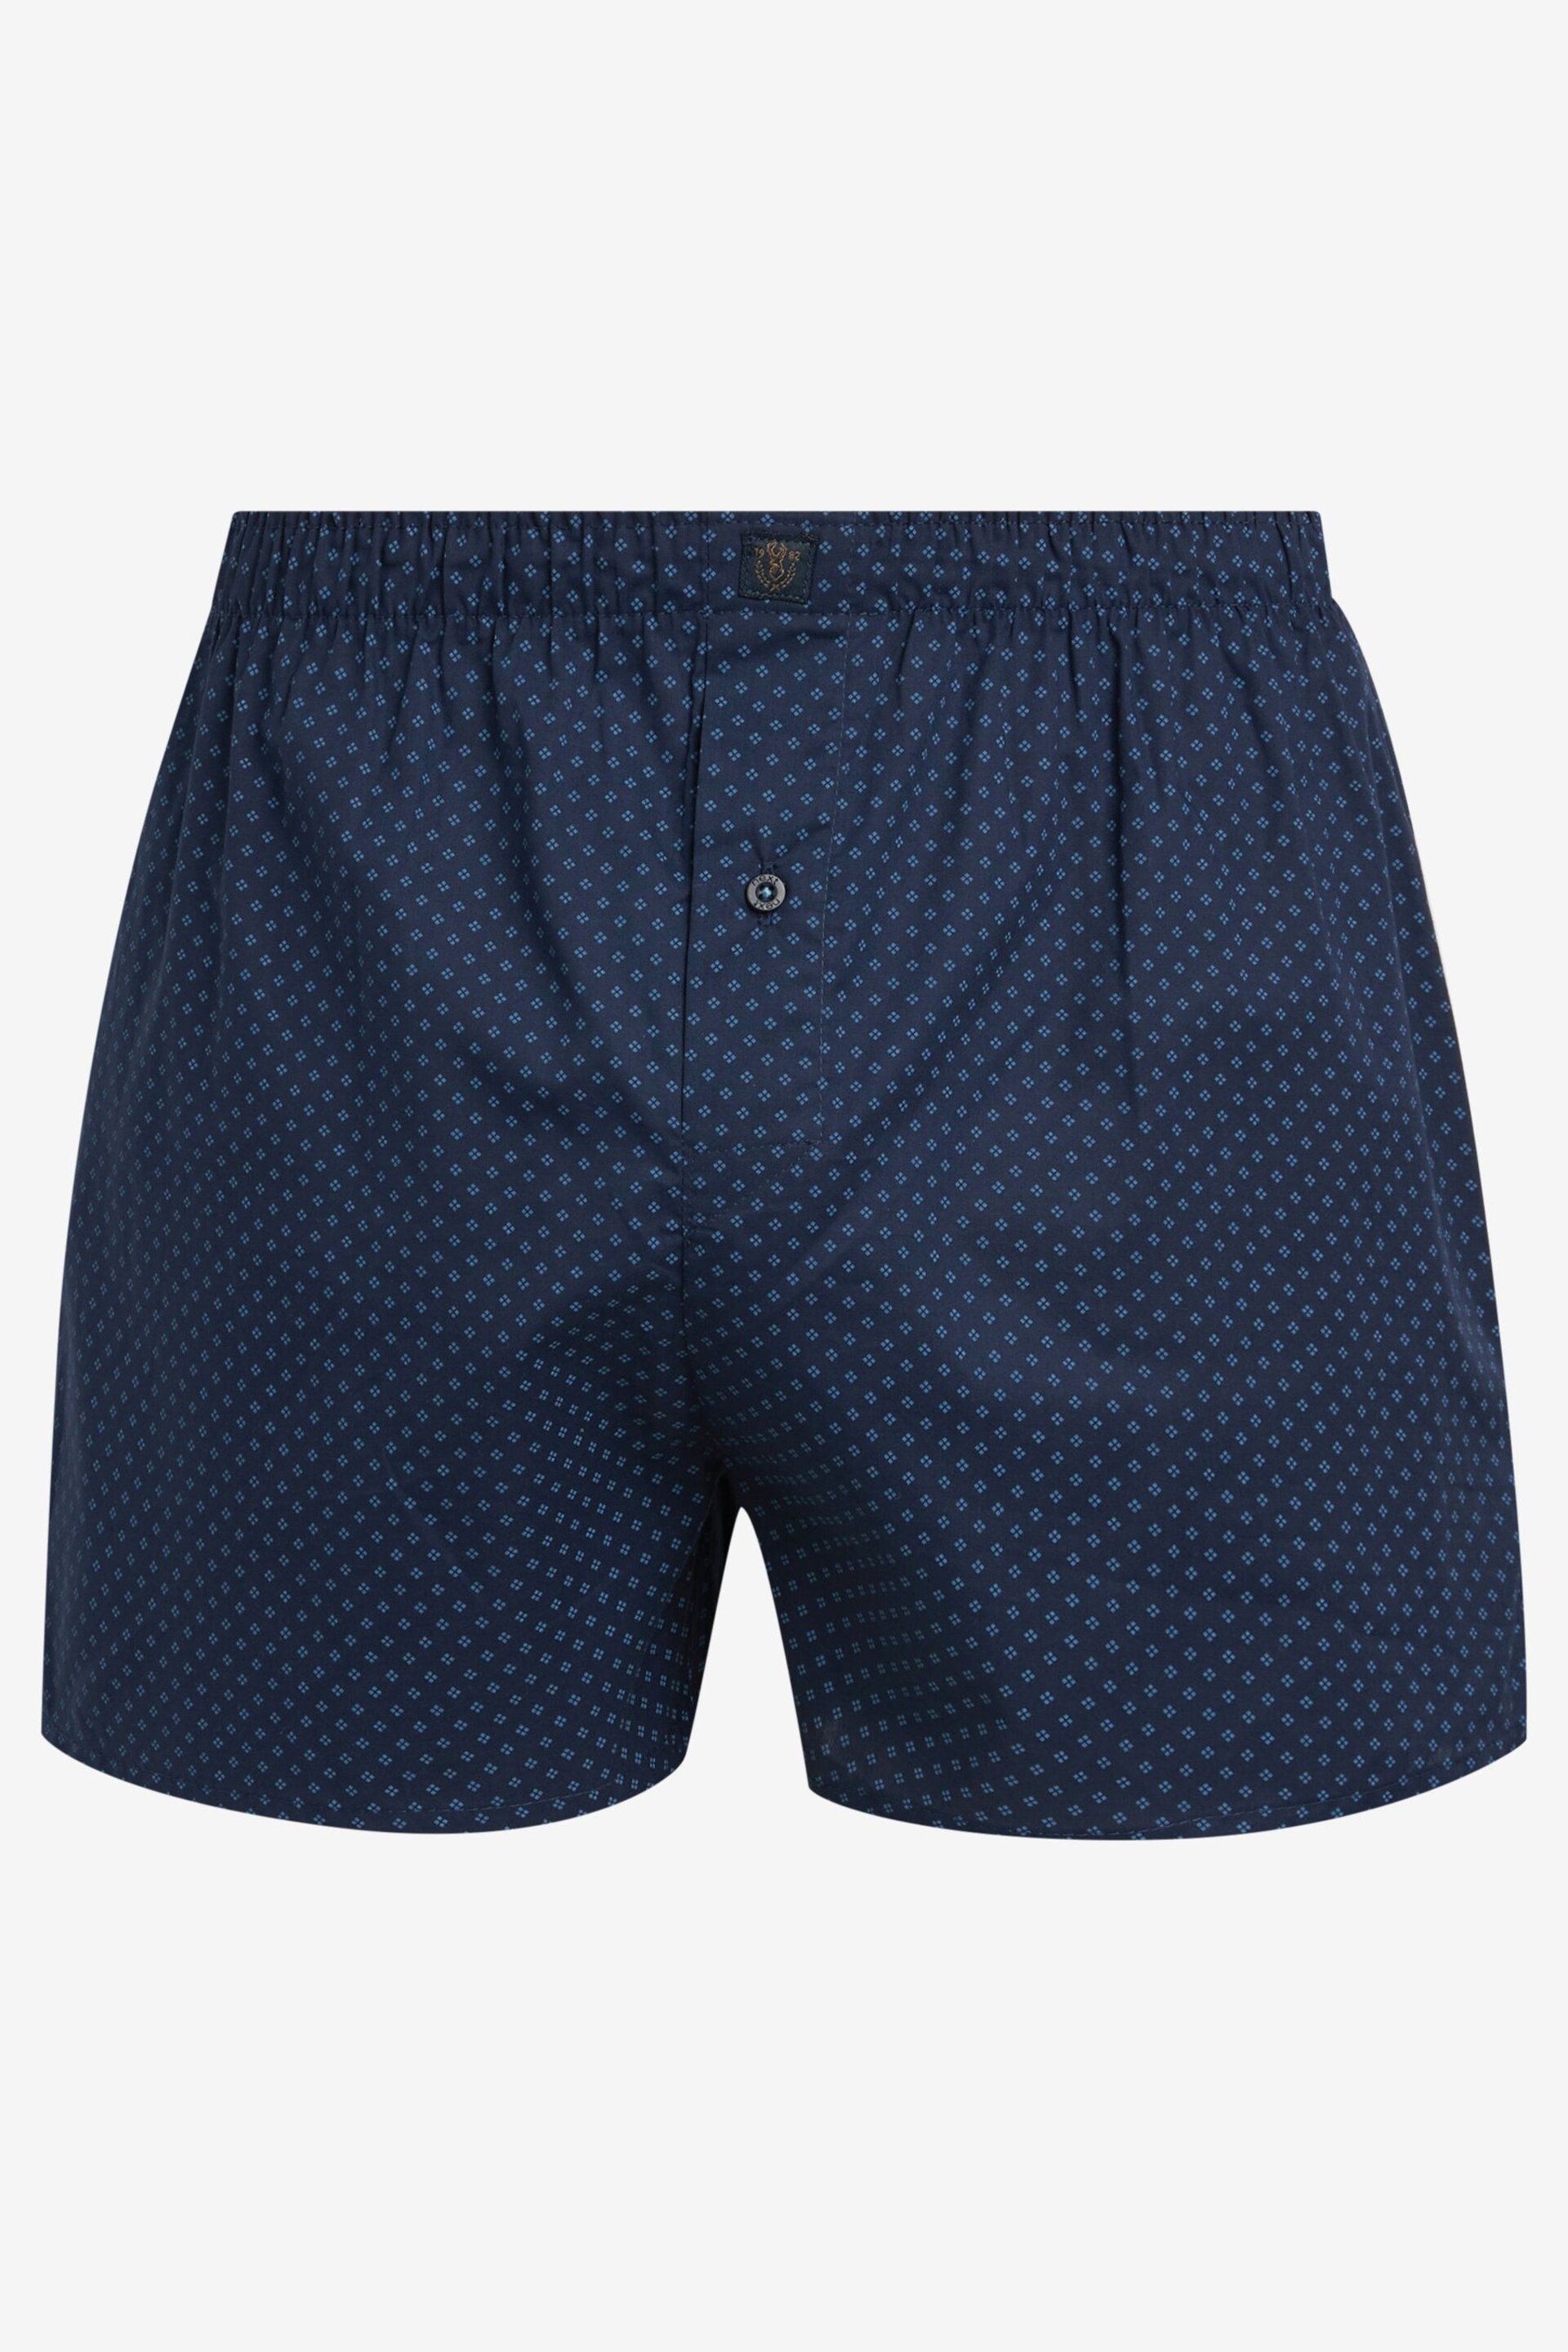 Navy 8 pack Woven Pure Cotton Boxers - Image 4 of 7